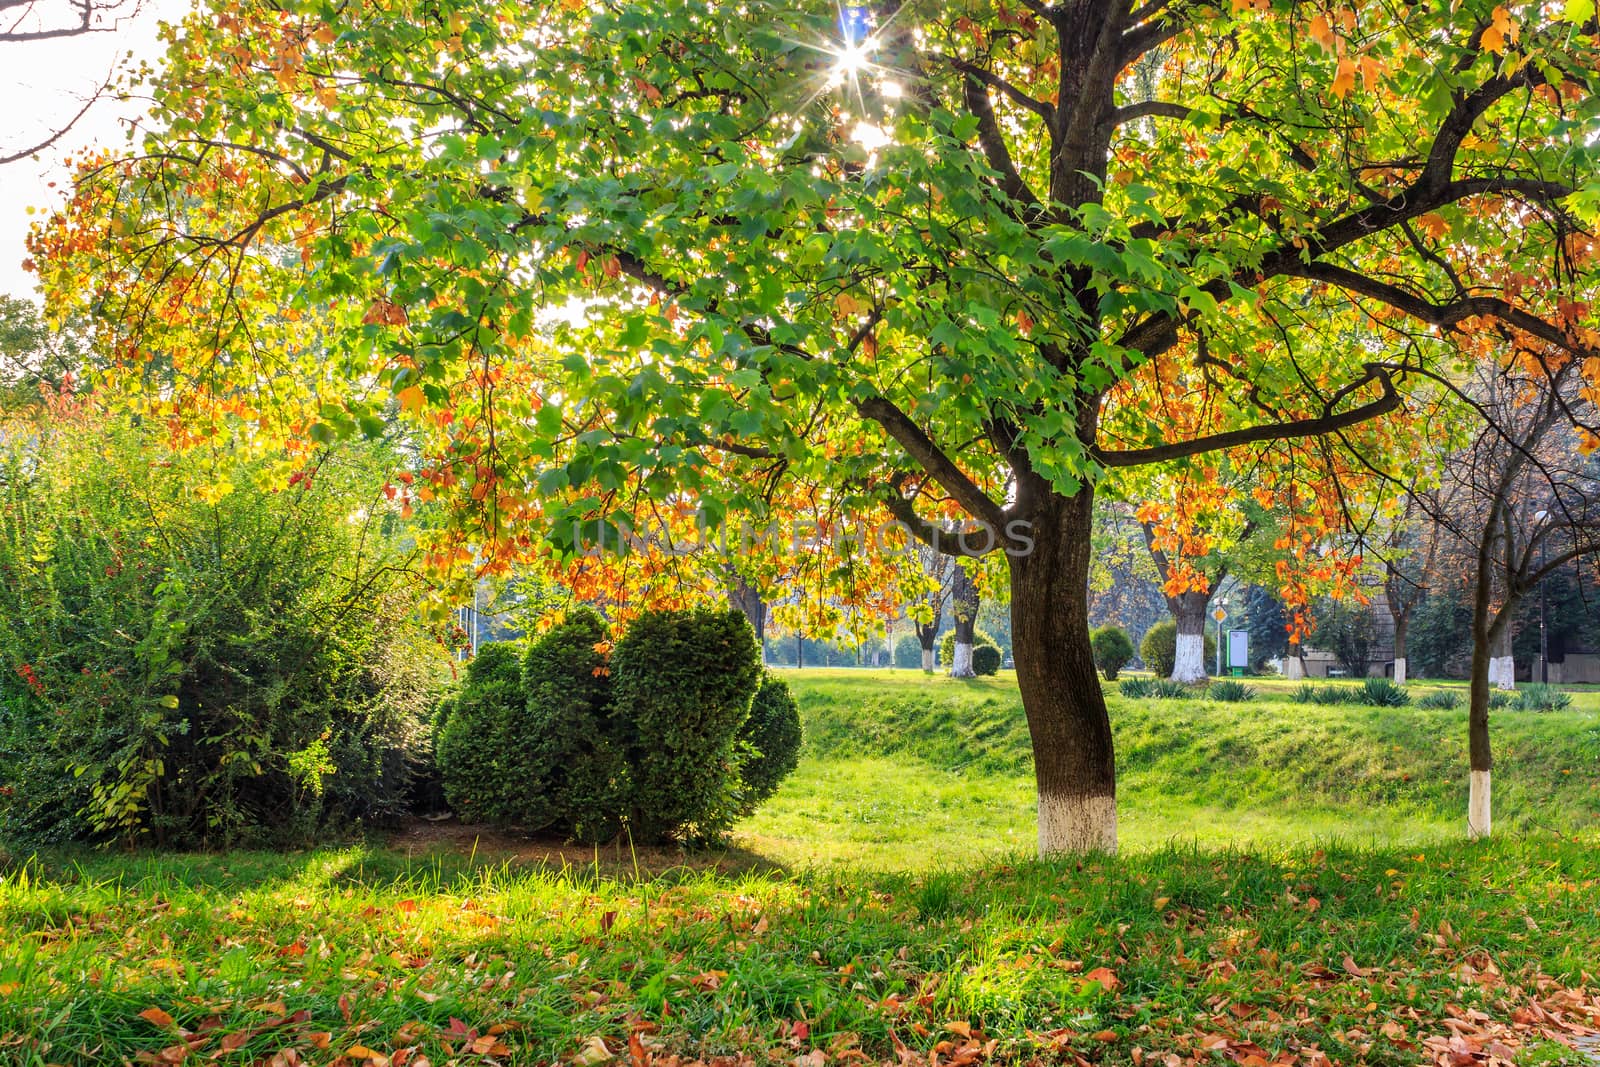 rays of the sun in the colorful leaves of trees in a city park in autumn